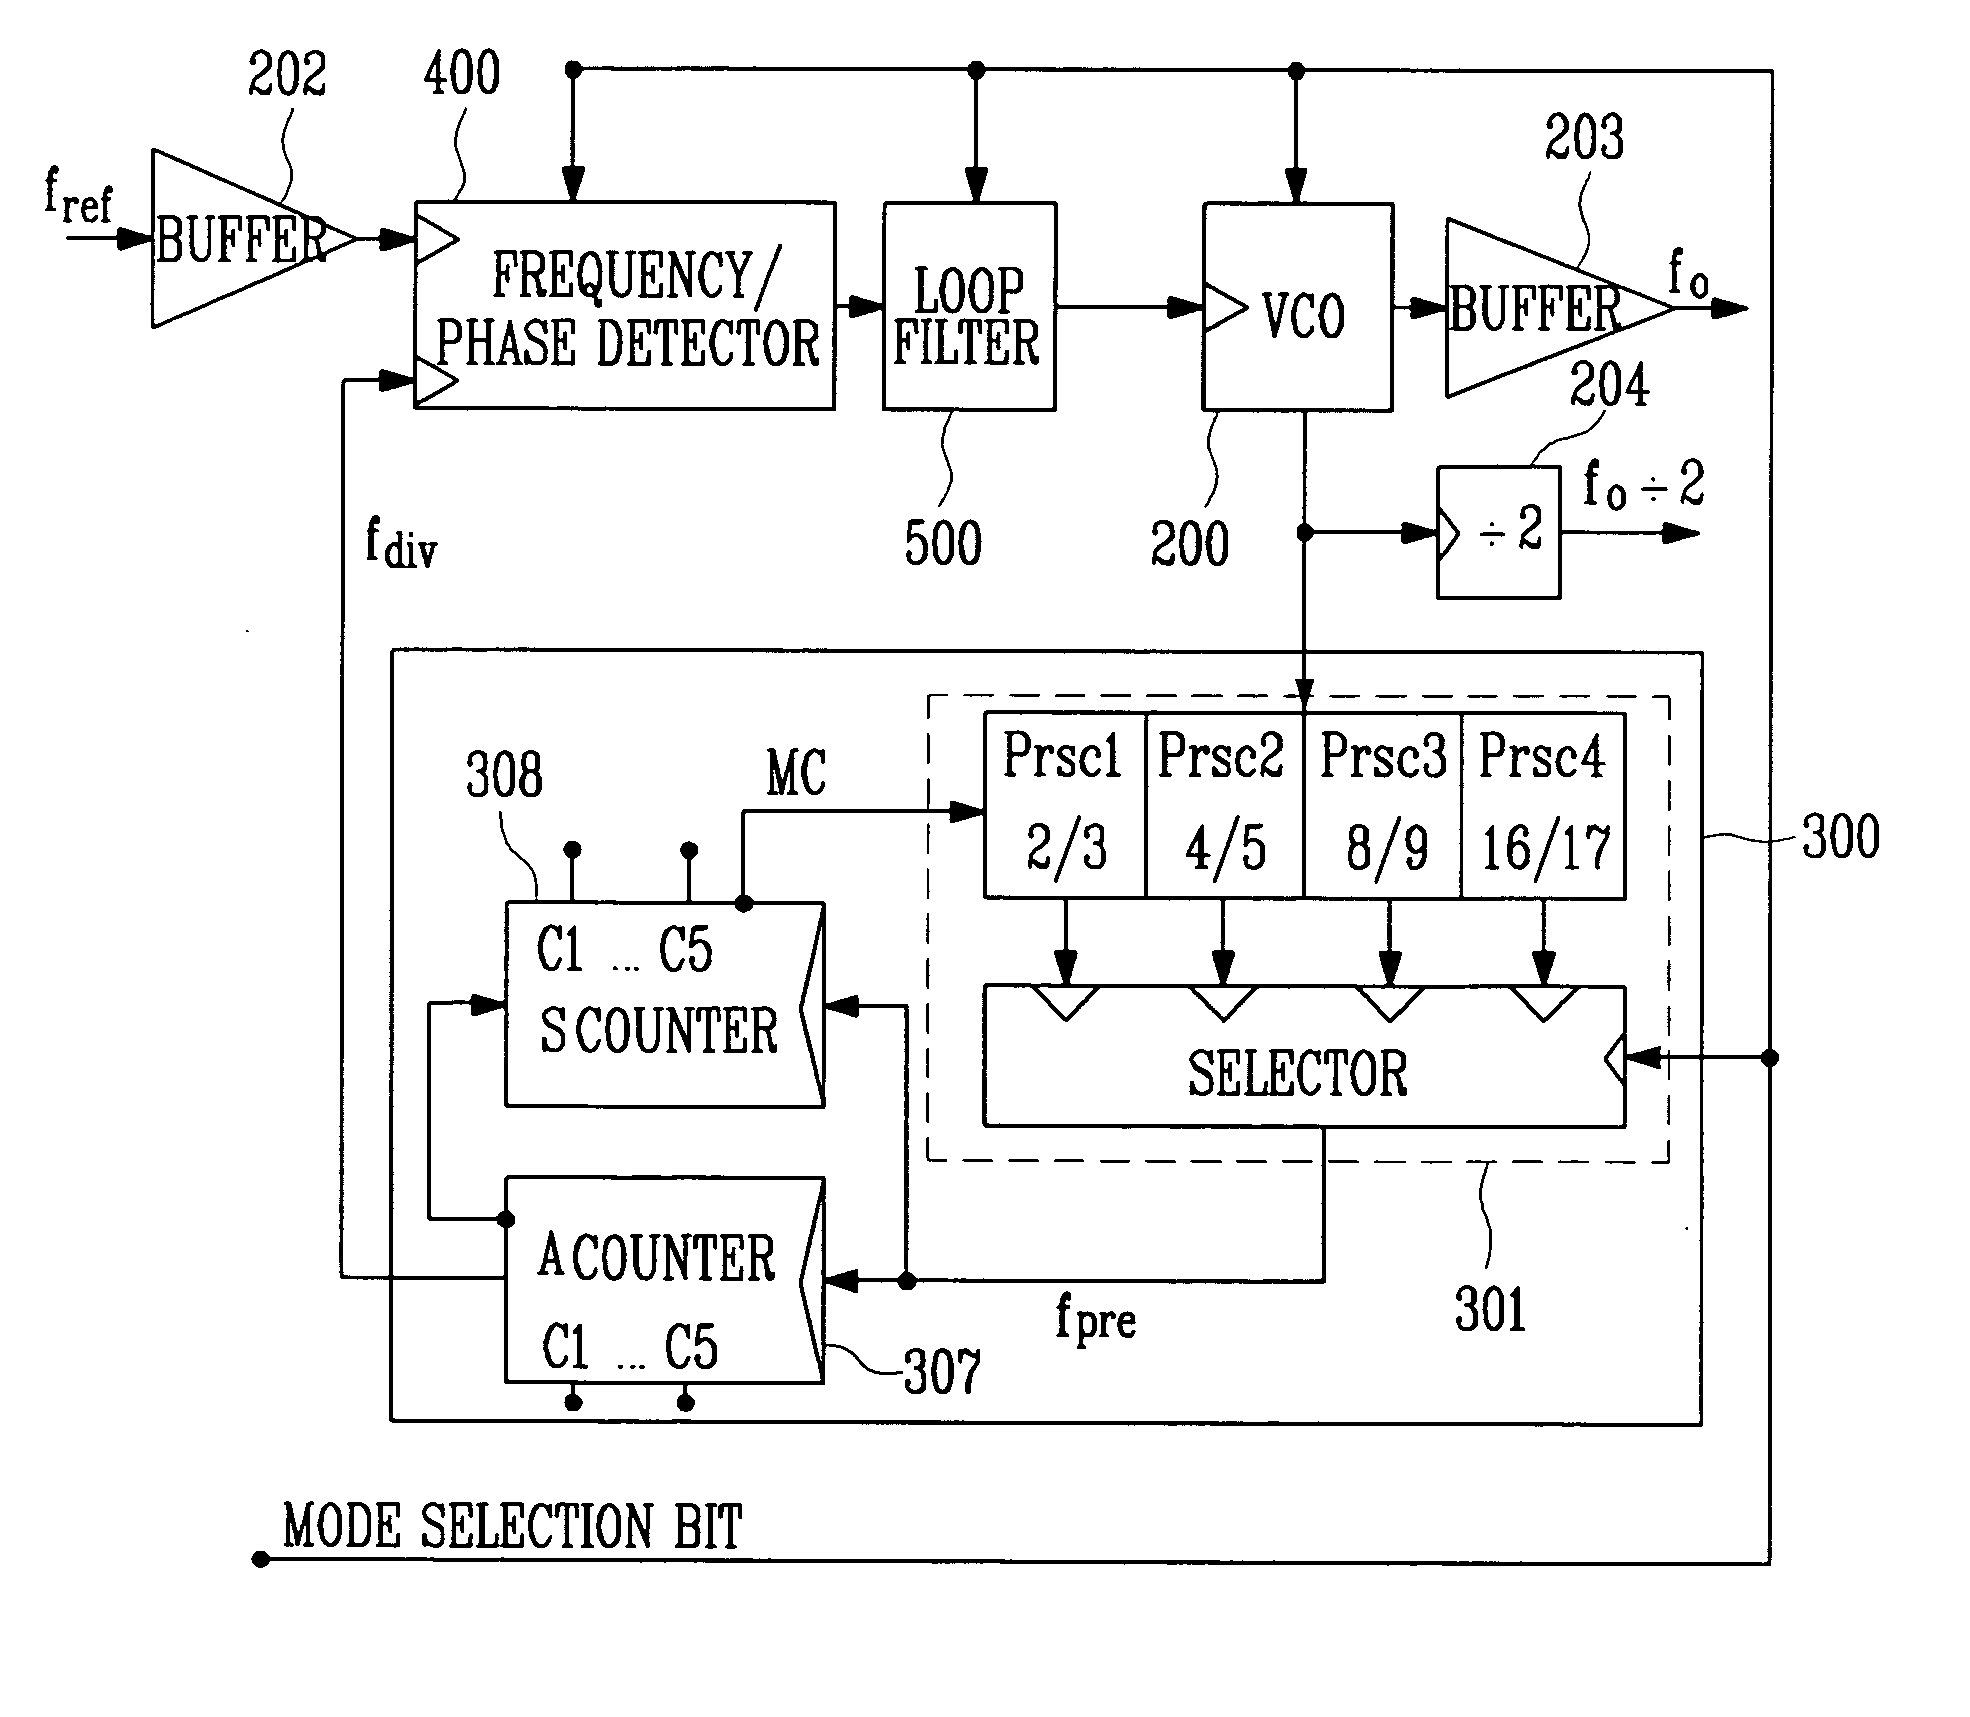 Wide-band multimode frequency synthesizer and variable frequency divider